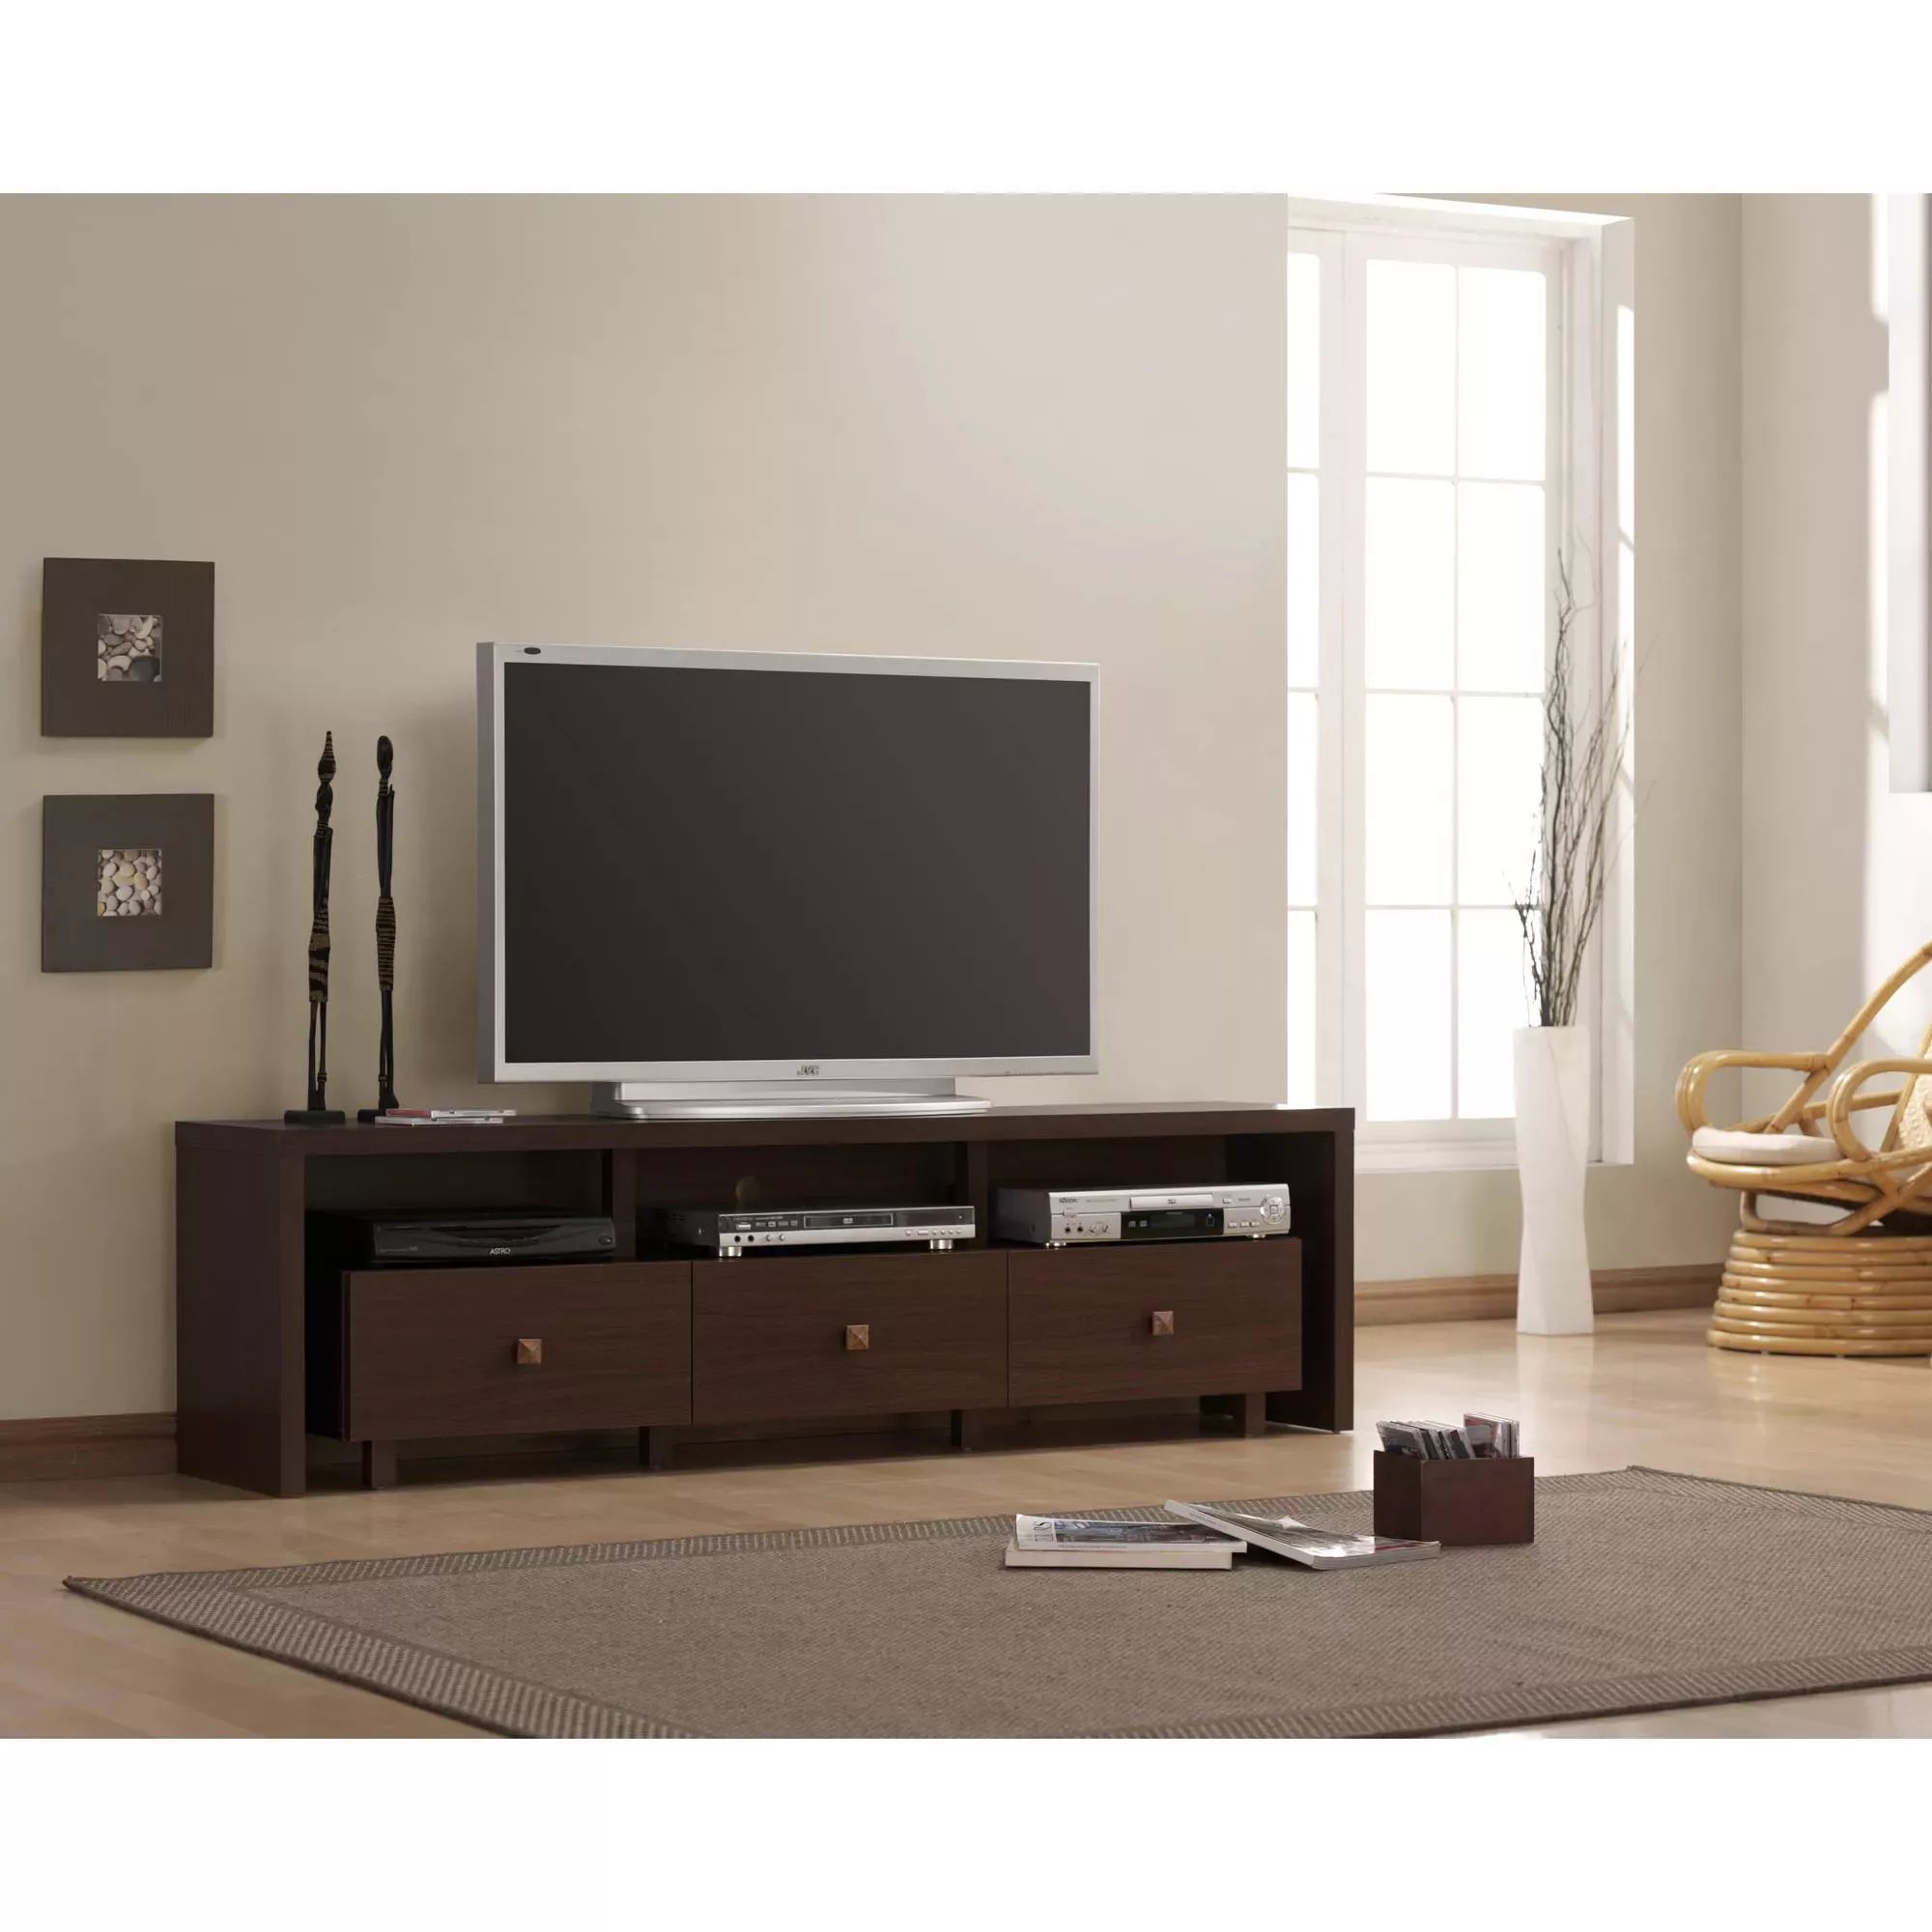 Featured Photo of 7 Best Ideas Techni Mobili 58" Durbin Tv Stands in Espresso or Grey Wood